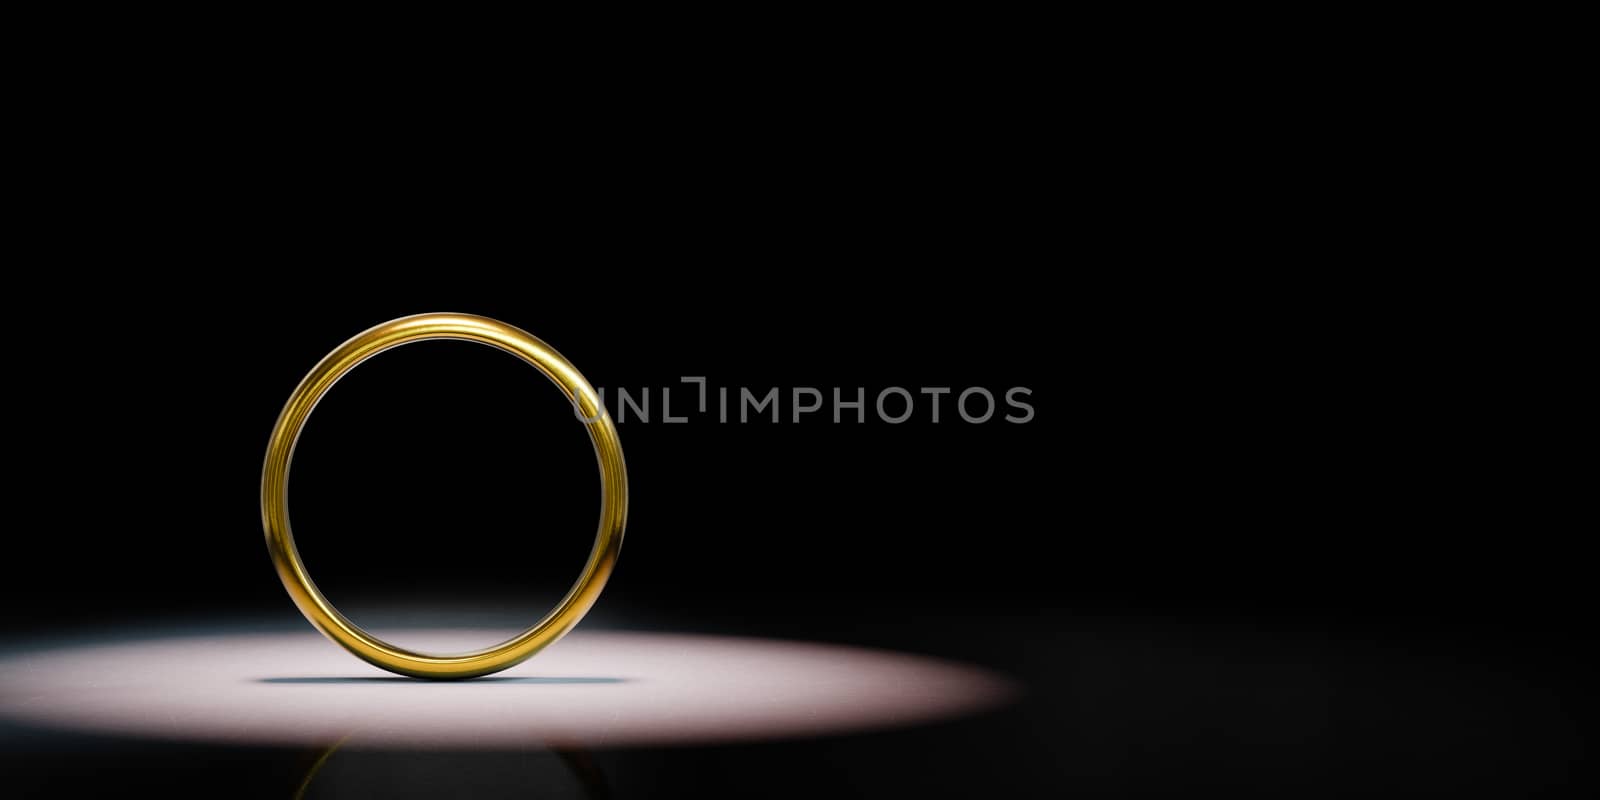 One Single Golden Ring Frame Spotlighted on Black Background with Copy Space 3D Illustration